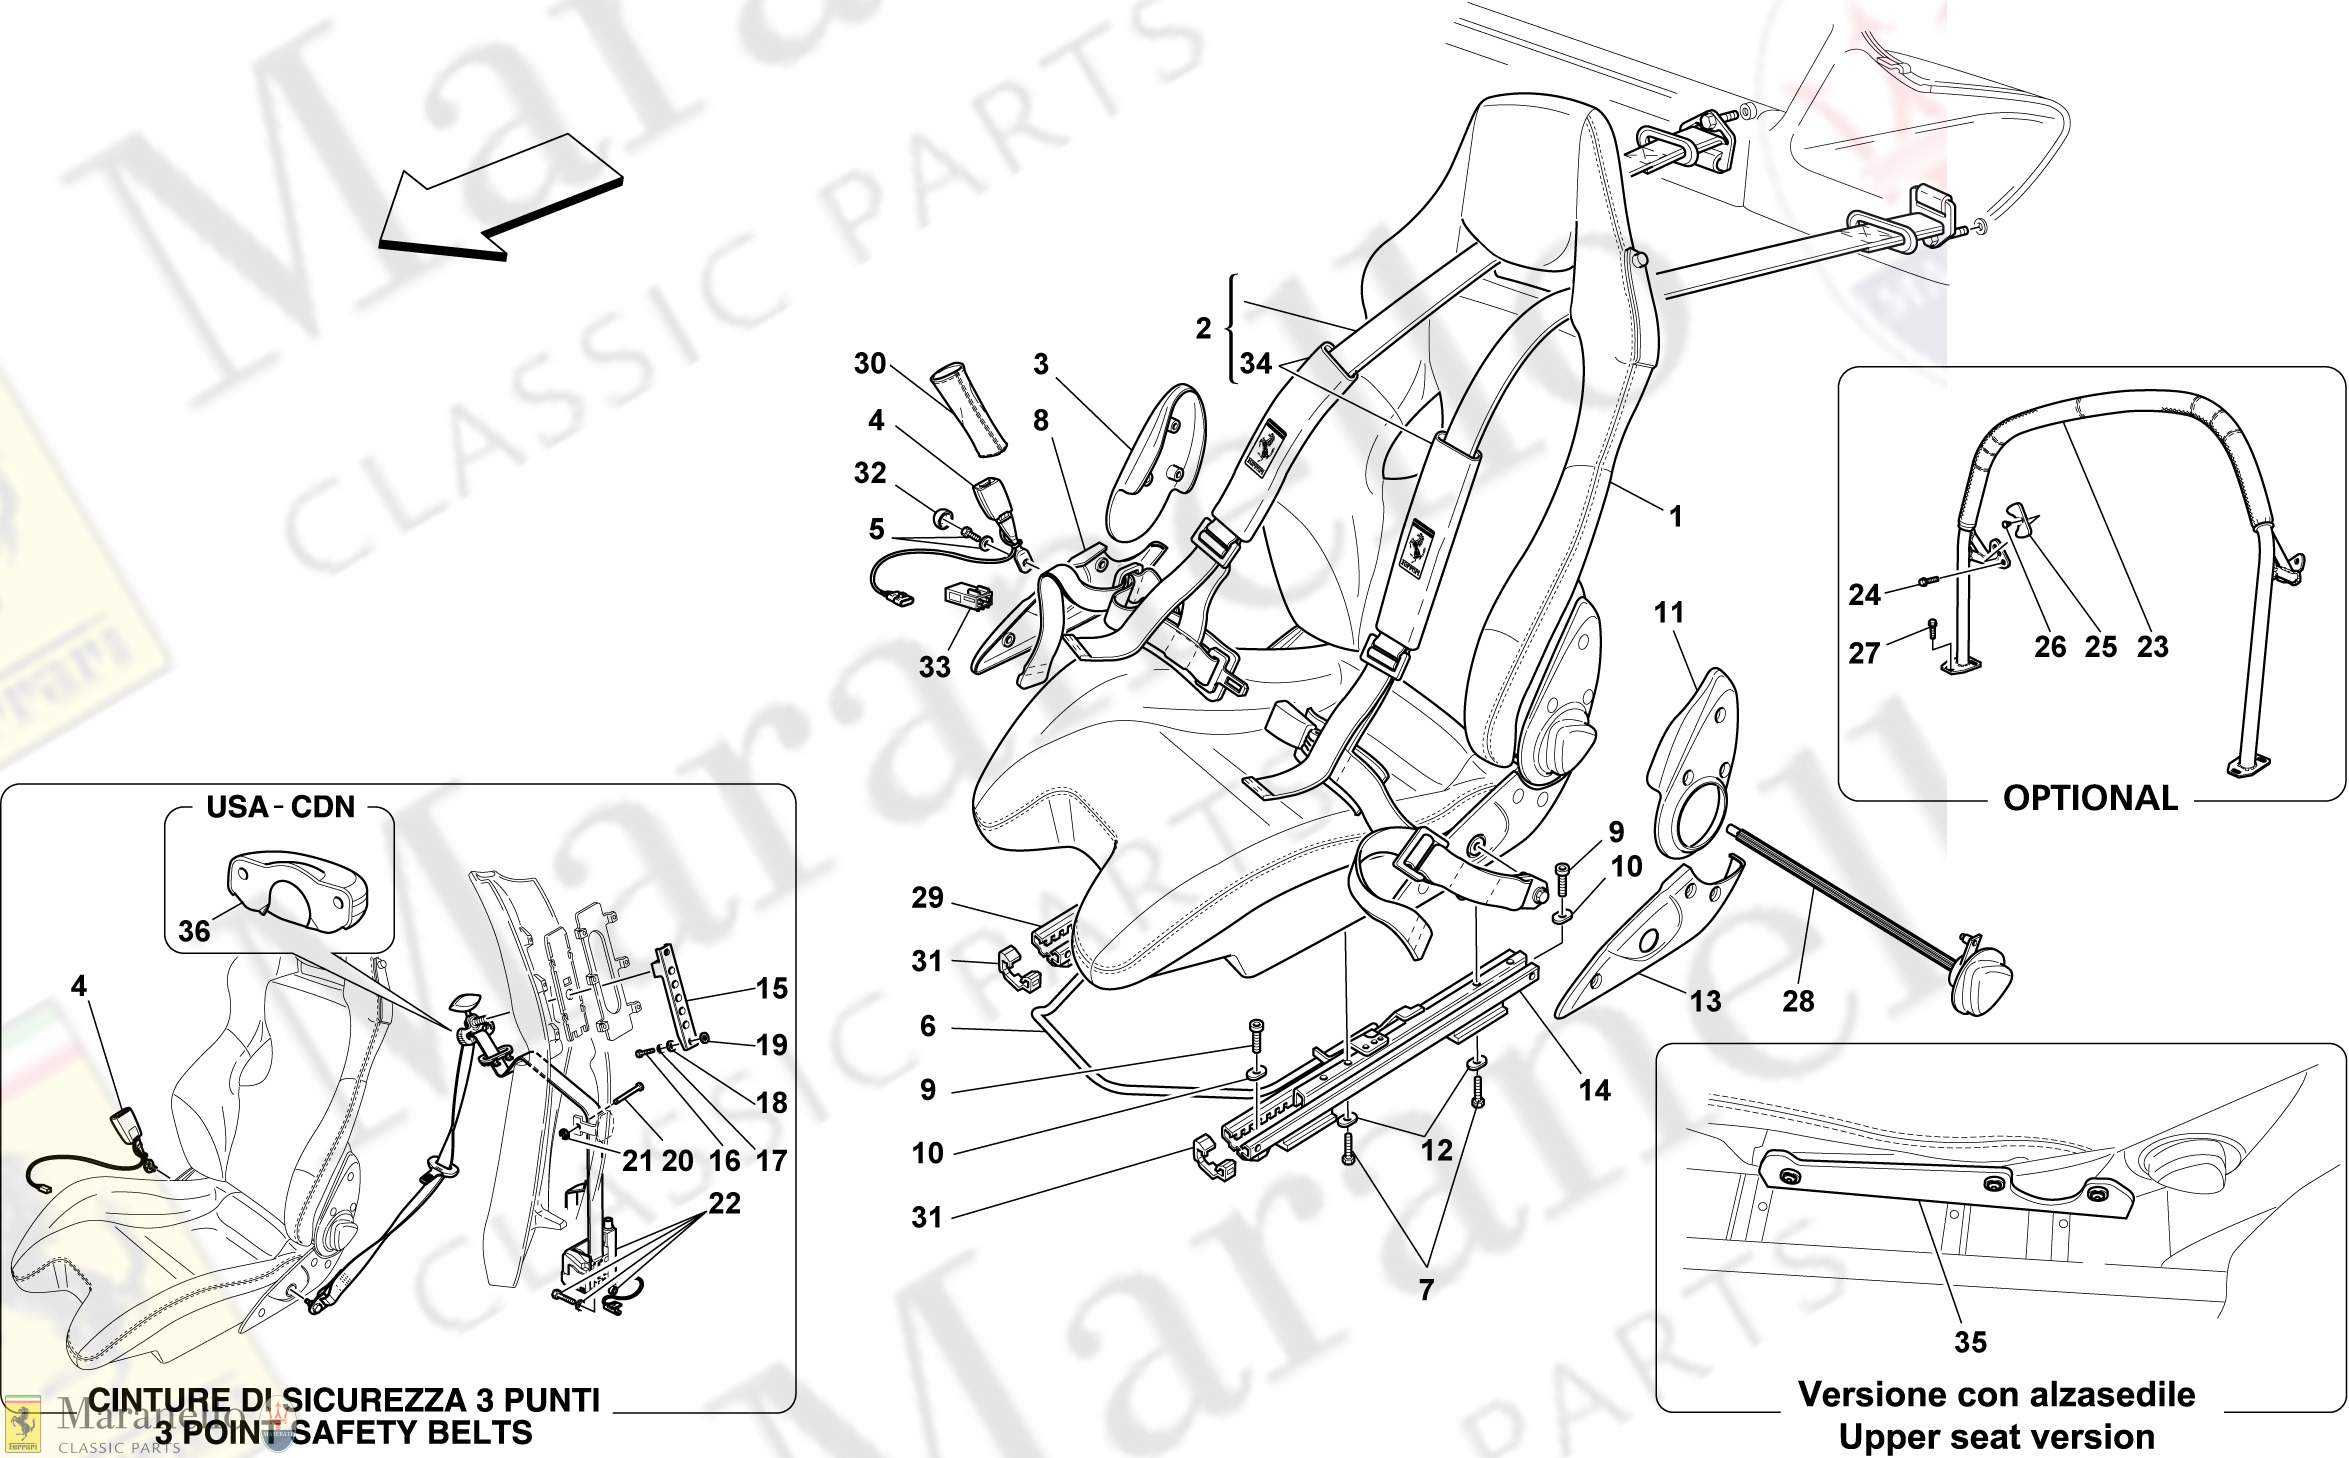 125 - Racing Seat-4 Point Seat Harness-Rollbar -Optional- -Sabelt-